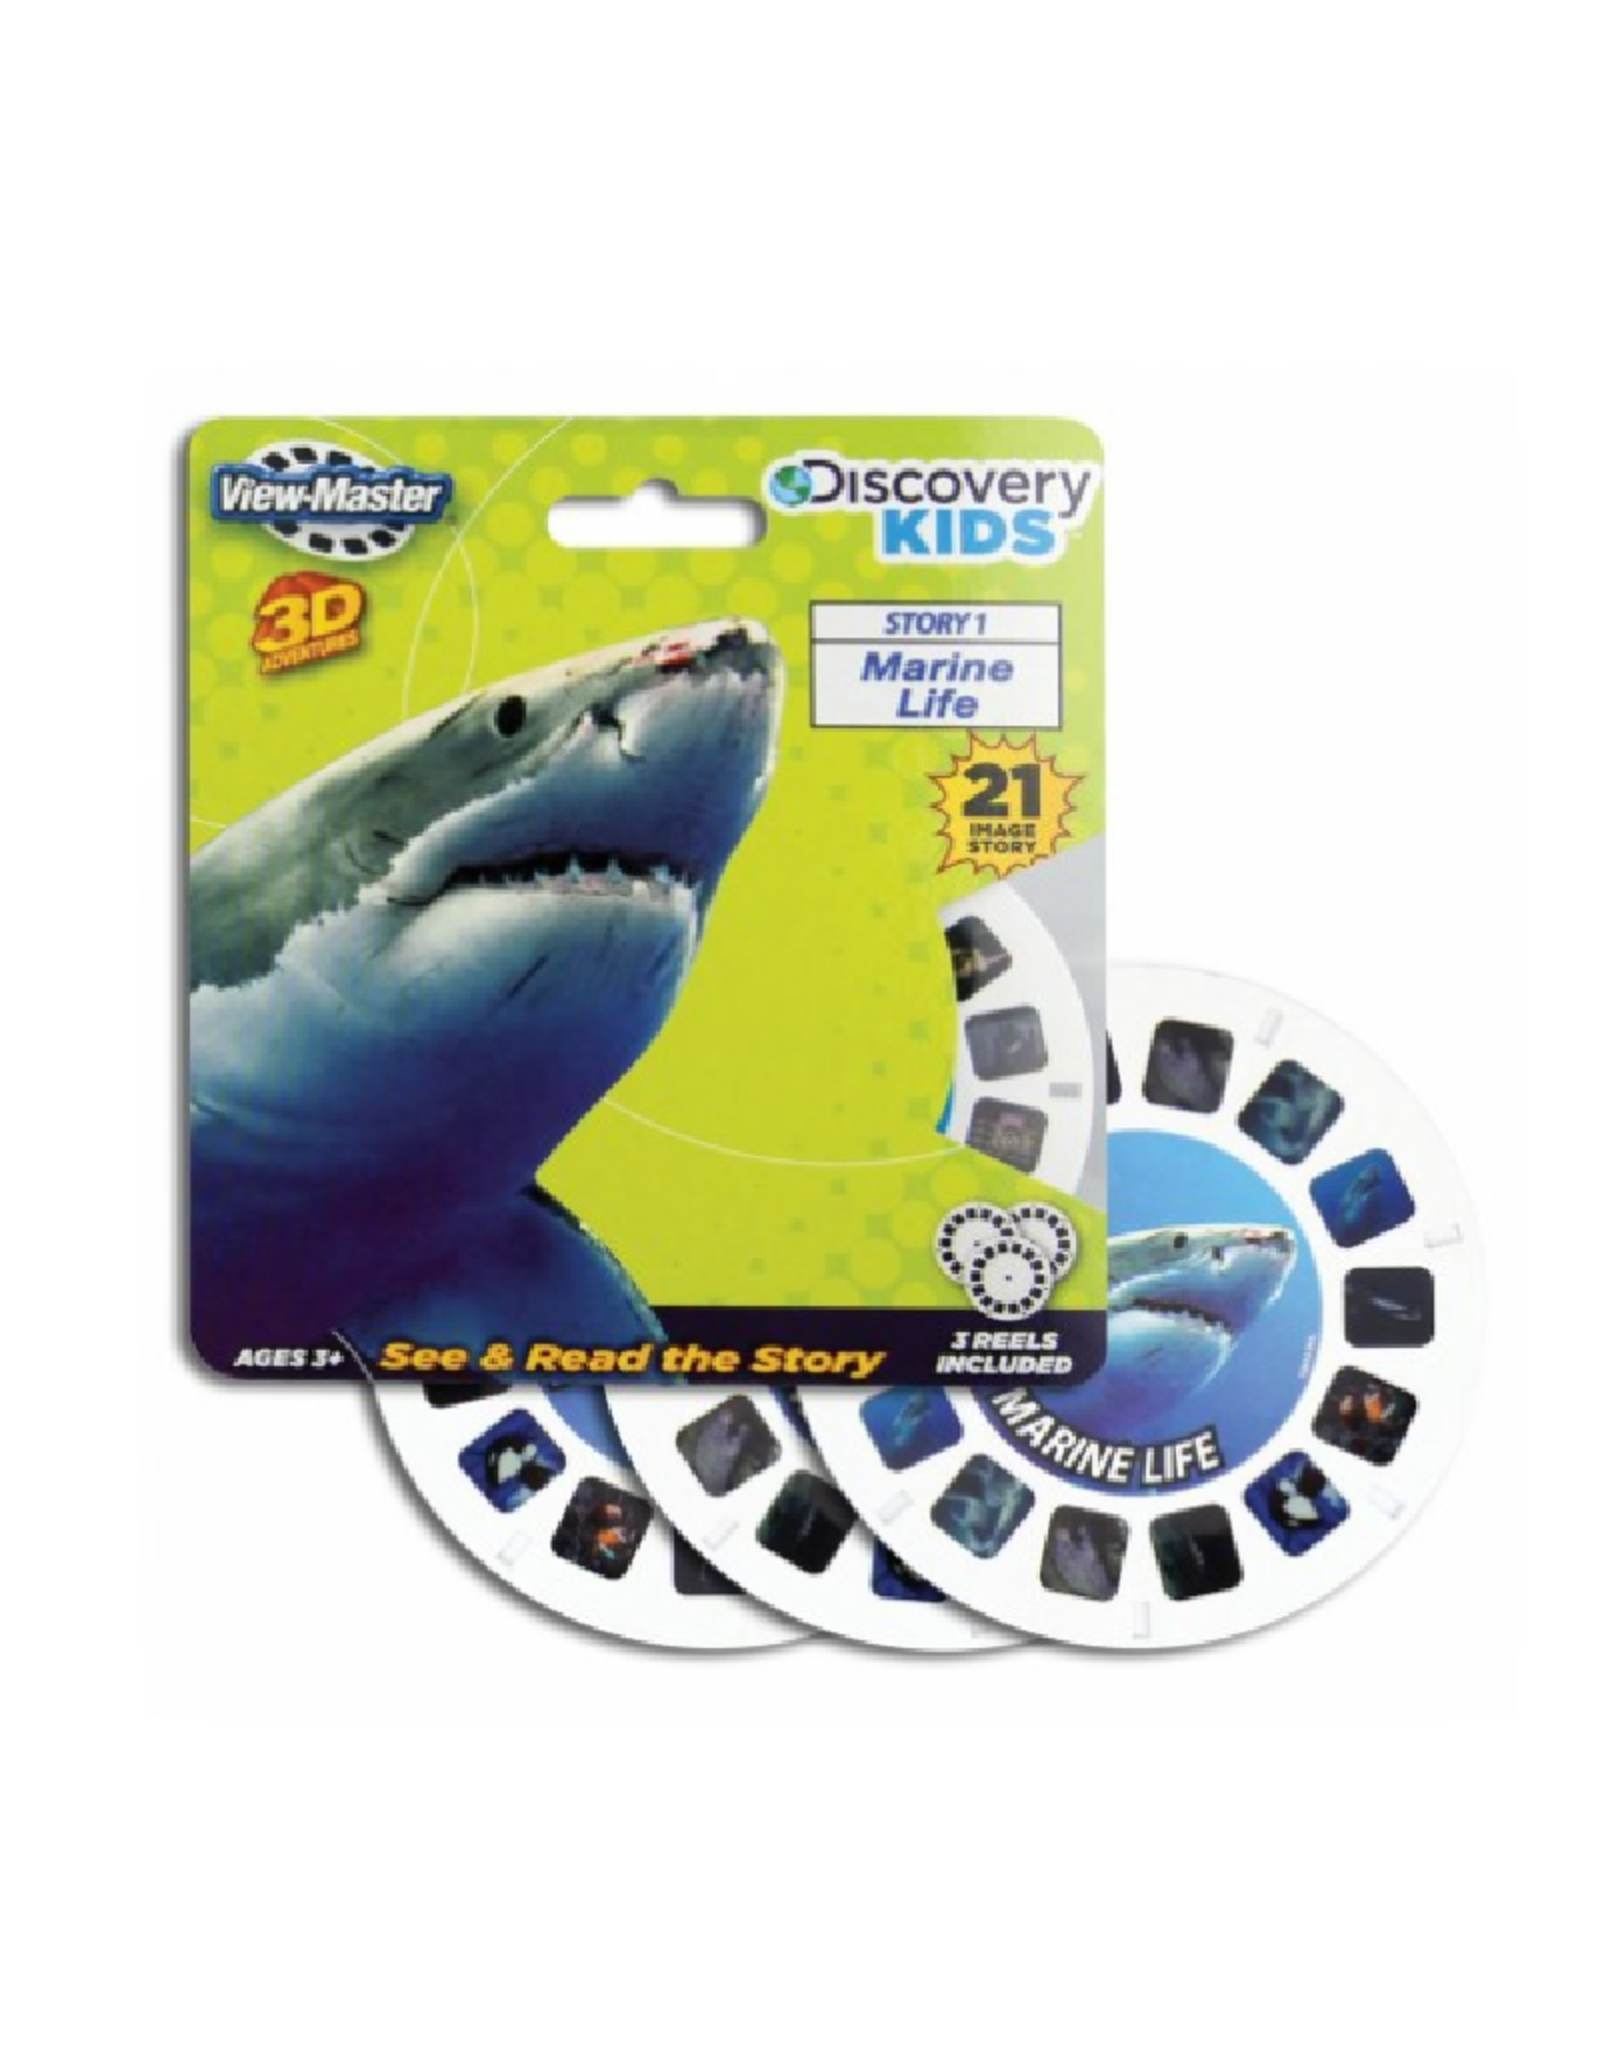 ViewMaster Classic (Marine Life Slides)